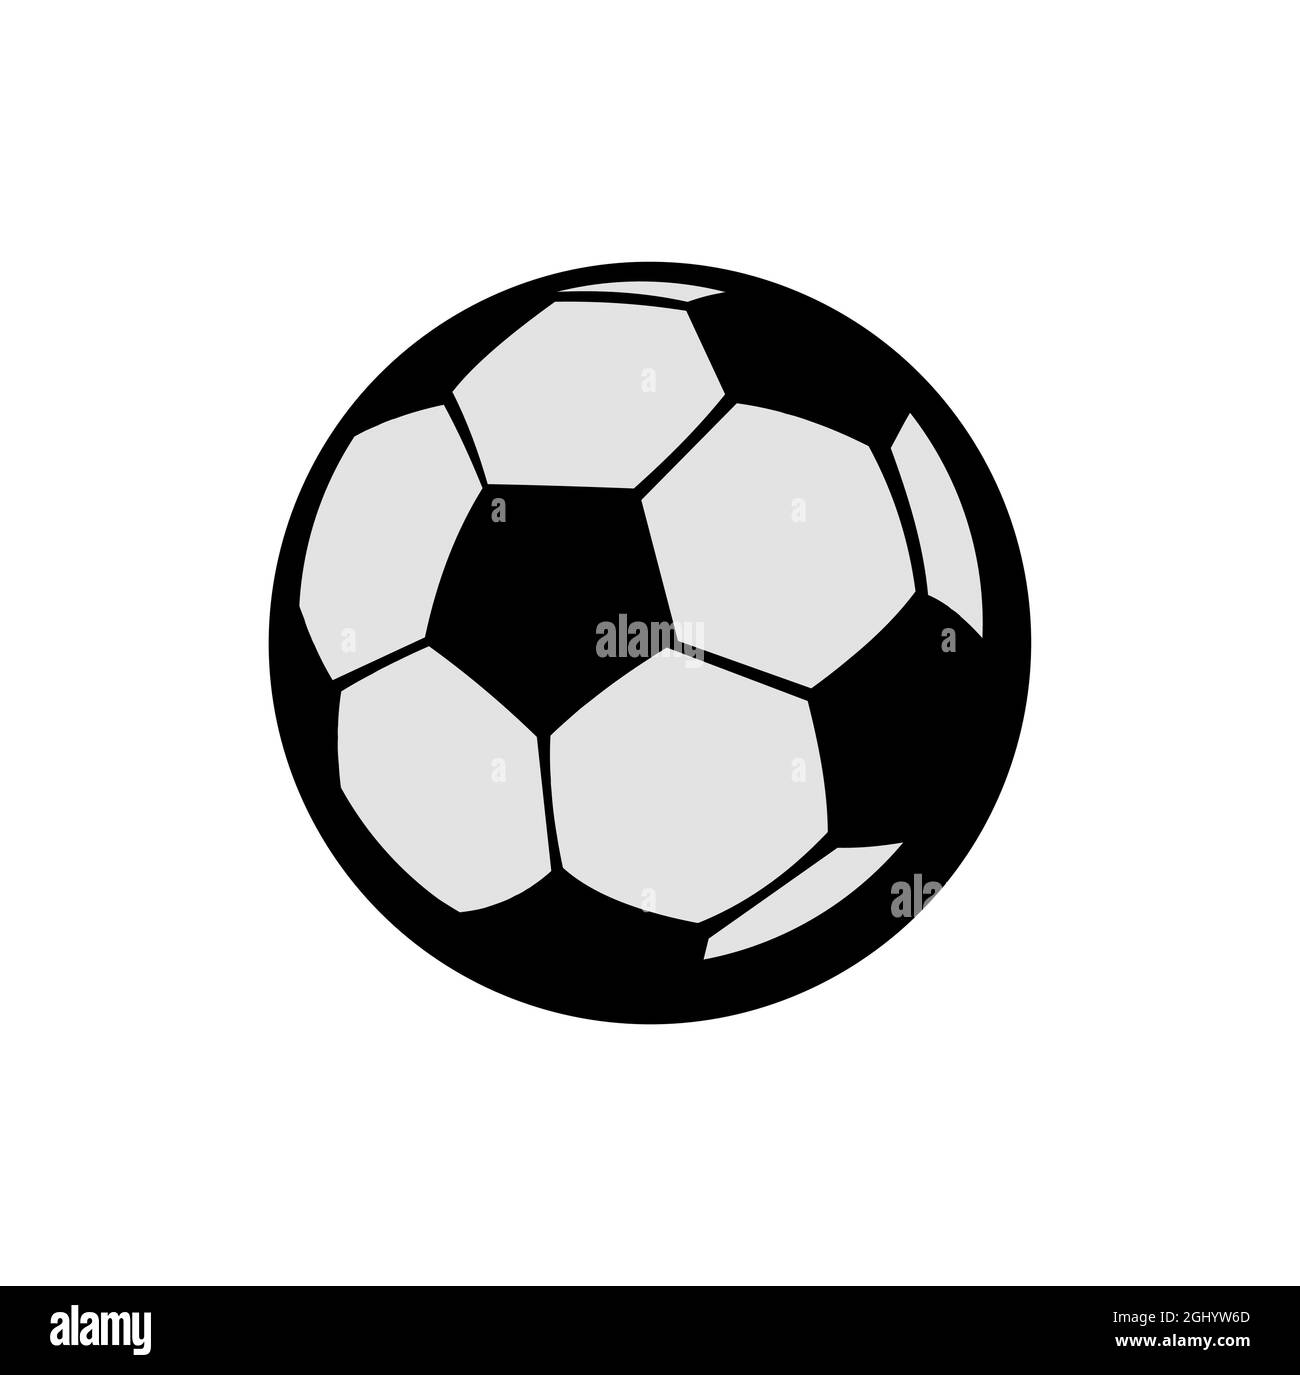 Soccer ball. Football. Sports equipment for athletes. Isolated on white background. Symbol, icon. Monochrome Illustration Vector. Stock Vector